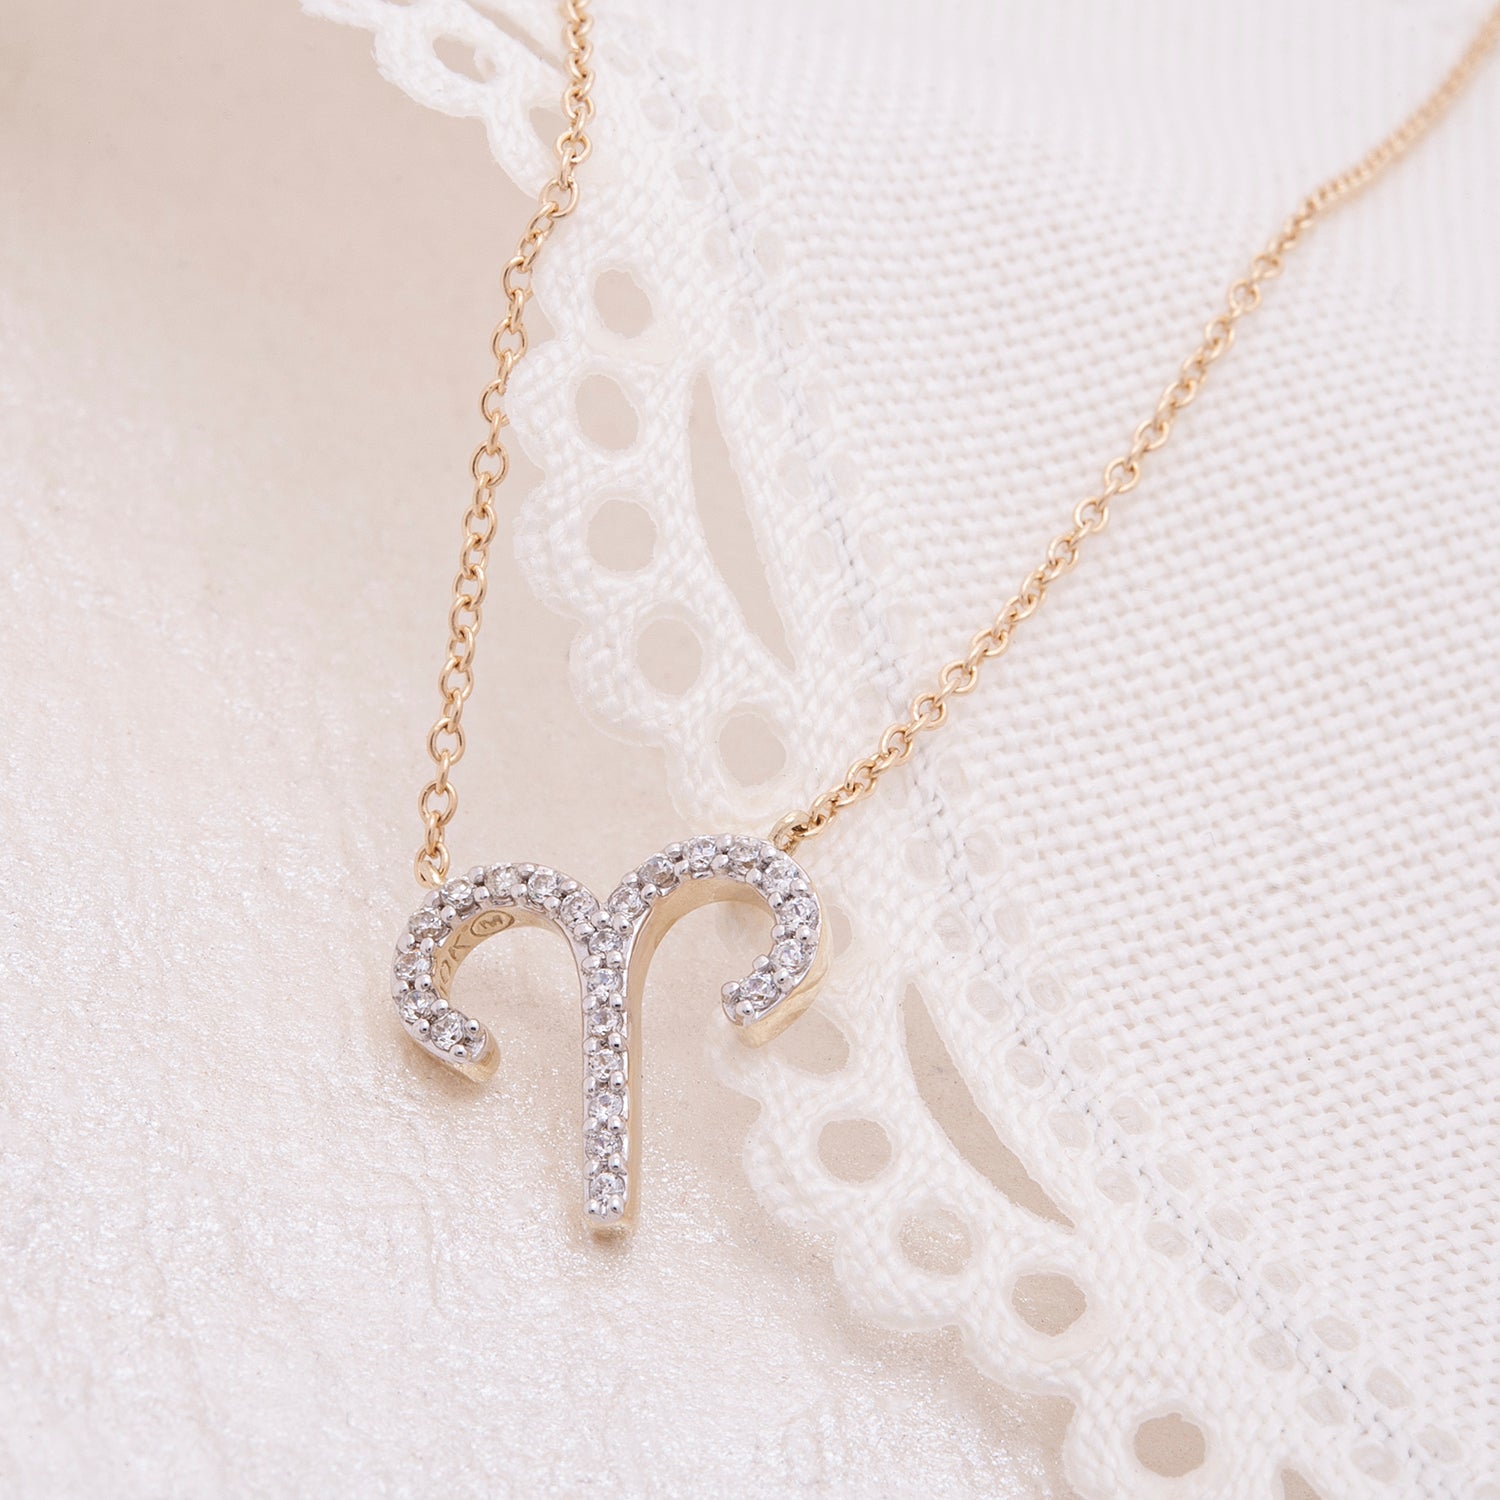 Aries Zodiac Diamond Necklace with Gold Chain